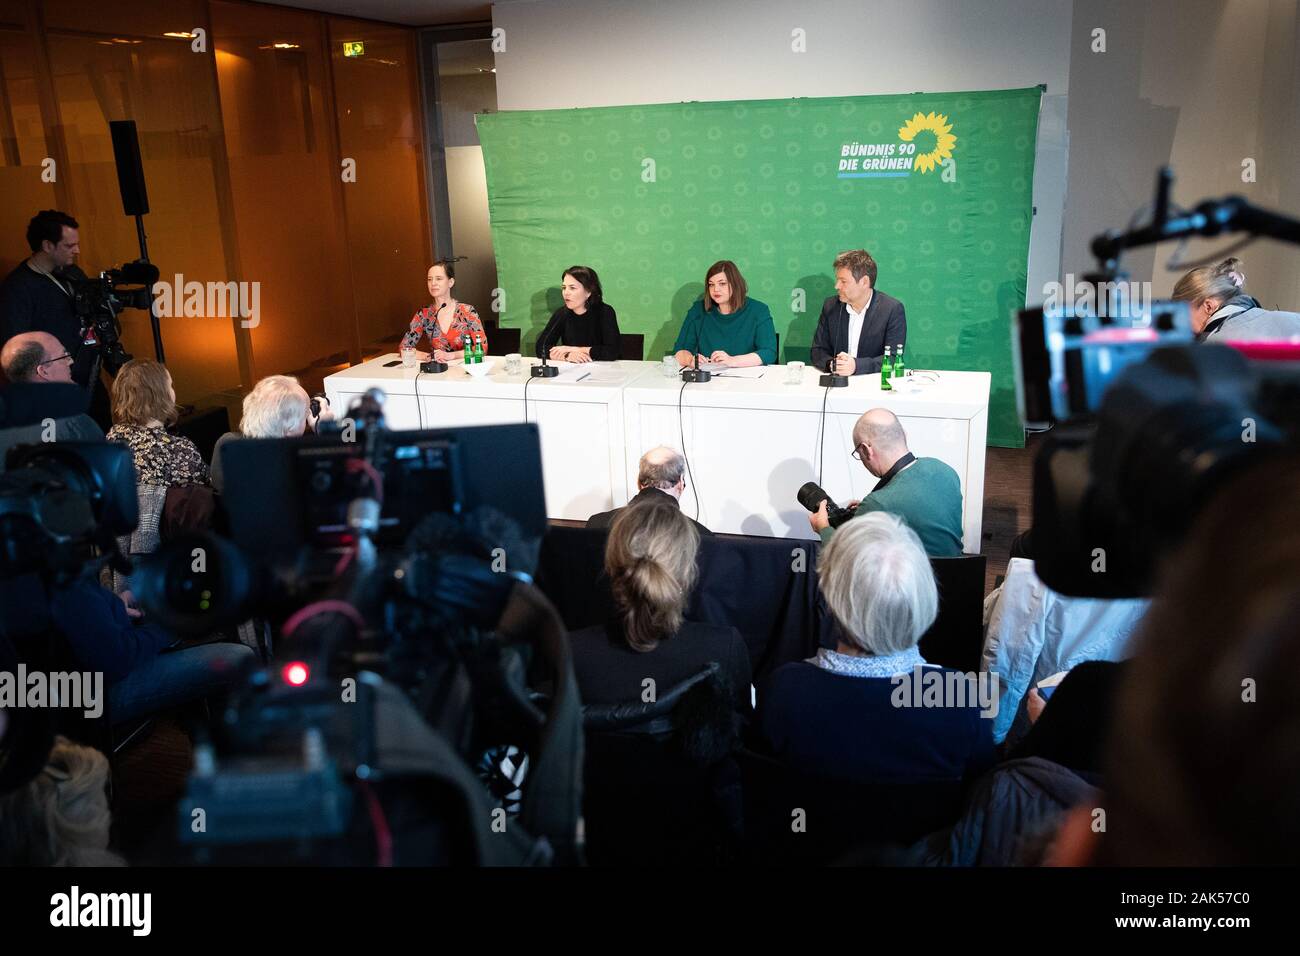 Hamburg, Germany. 07th Jan, 2020. Annalena Baerbock (2nd from left), Federal Chairwoman of Bündnis 90/Die Grünen, Katharina Fegebank (Bündnis 90/Die Grünen), Second Mayor of Hamburg and top candidate for the state election, Robert Habeck (r), Federal Chairwoman of Bündnis 90/Die Grünen, and Nicola Kabel (l), Head of Press and Communications of Bündnis 90/Die Grünen, at a press conference after the annual kick-off meeting of the Green Party's Federal Executive Committee. Credit: Christian Charisius/dpa/Alamy Live News Stock Photo